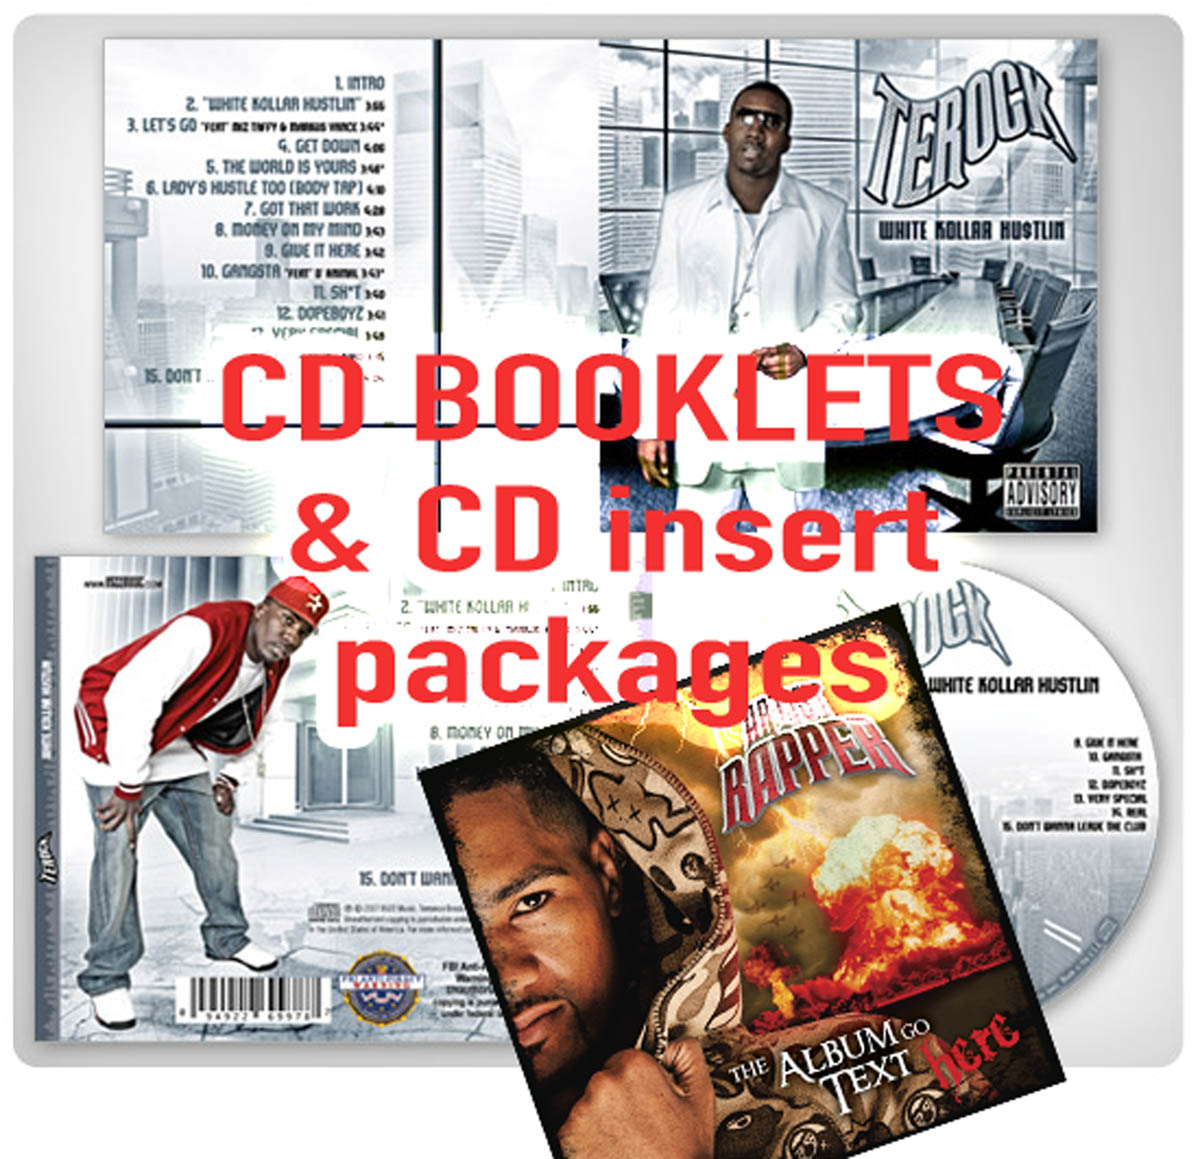 CD booklets - DiscMasters